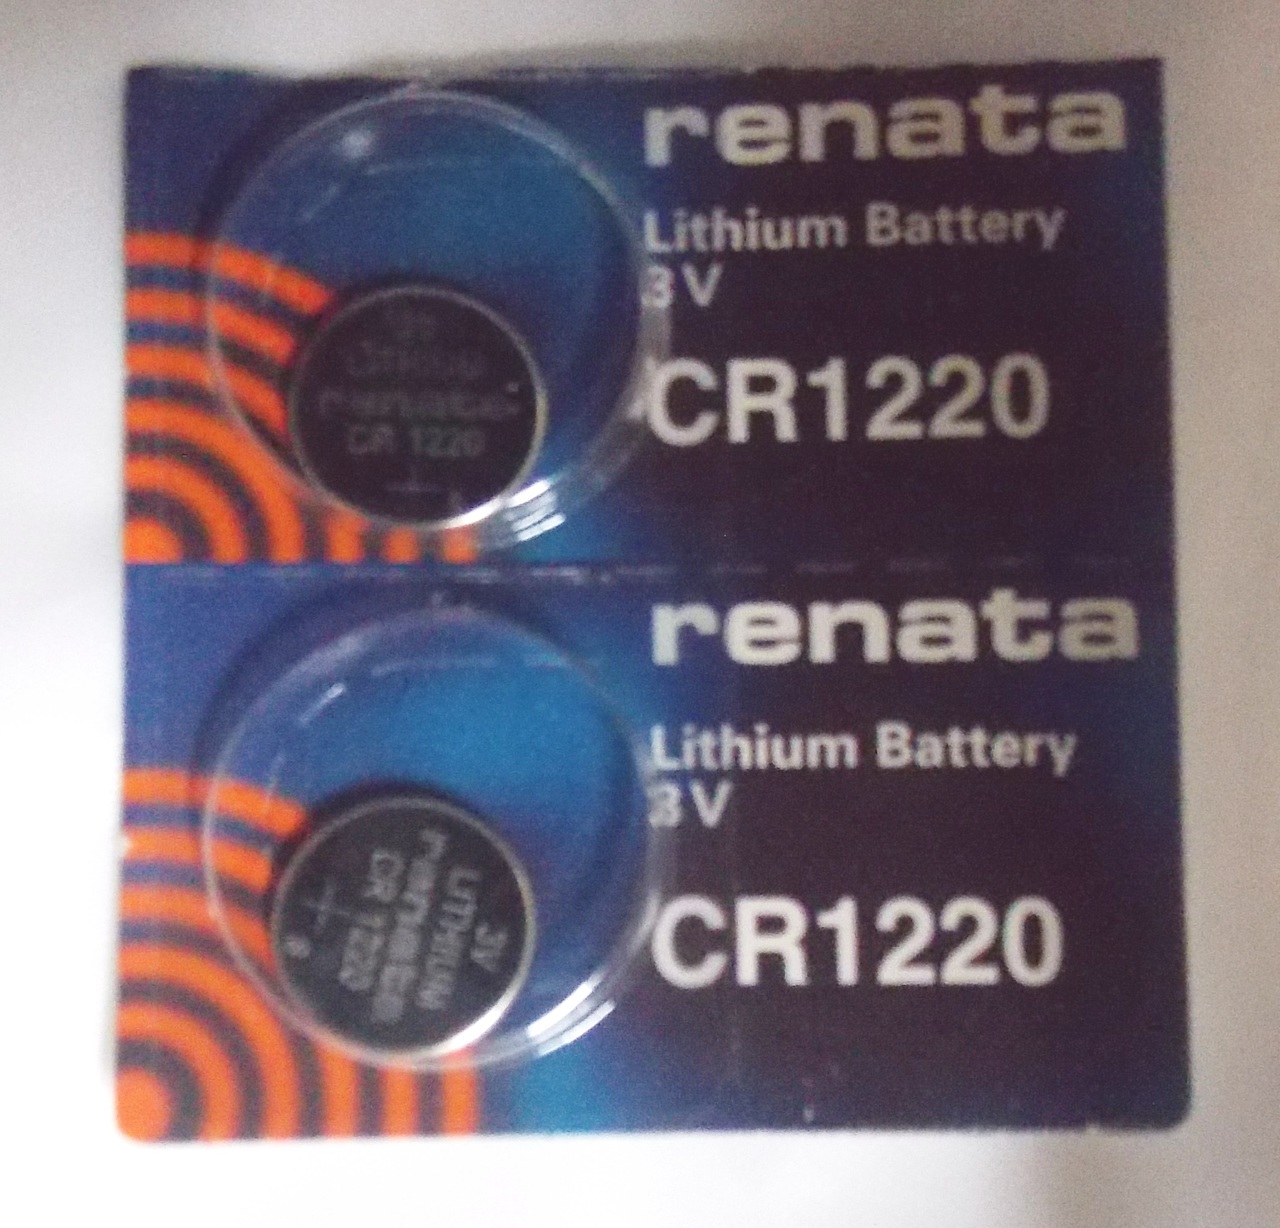 Renata CR1220 3V Lithium Coin Battery - 2 Pack + FREE SHIPPING!